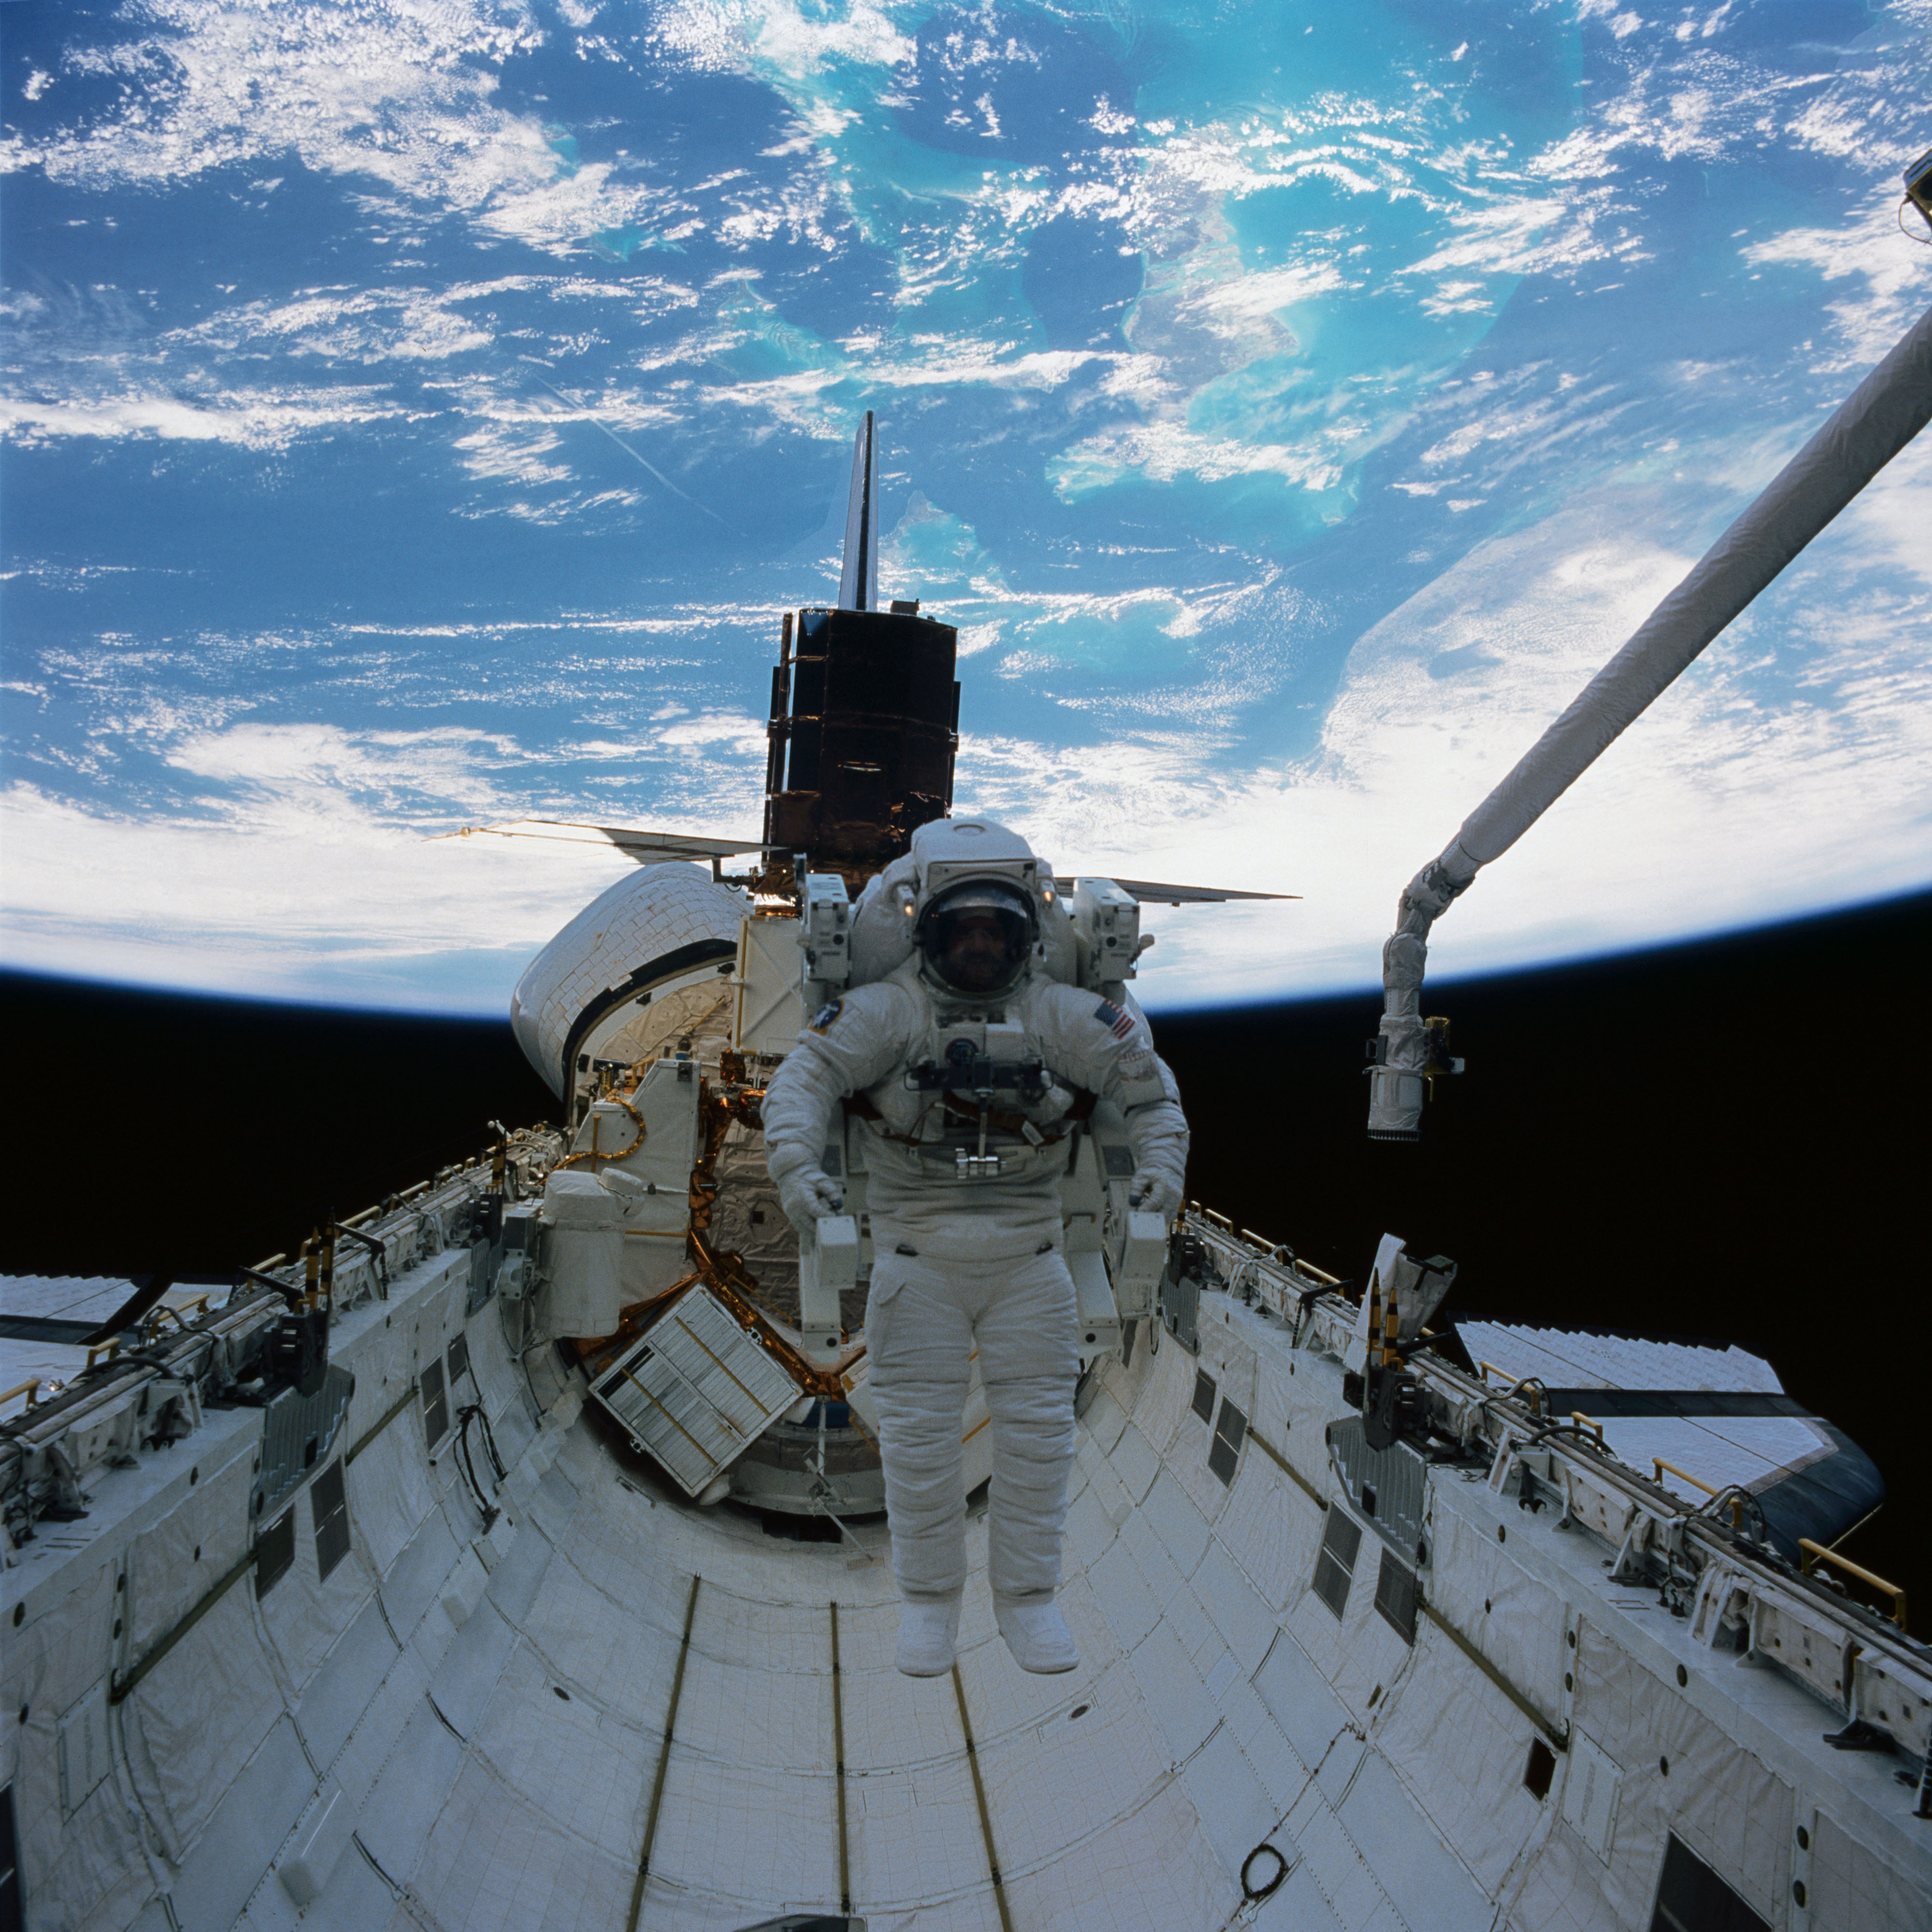 During the second STS-41C spacewalk, James D. 